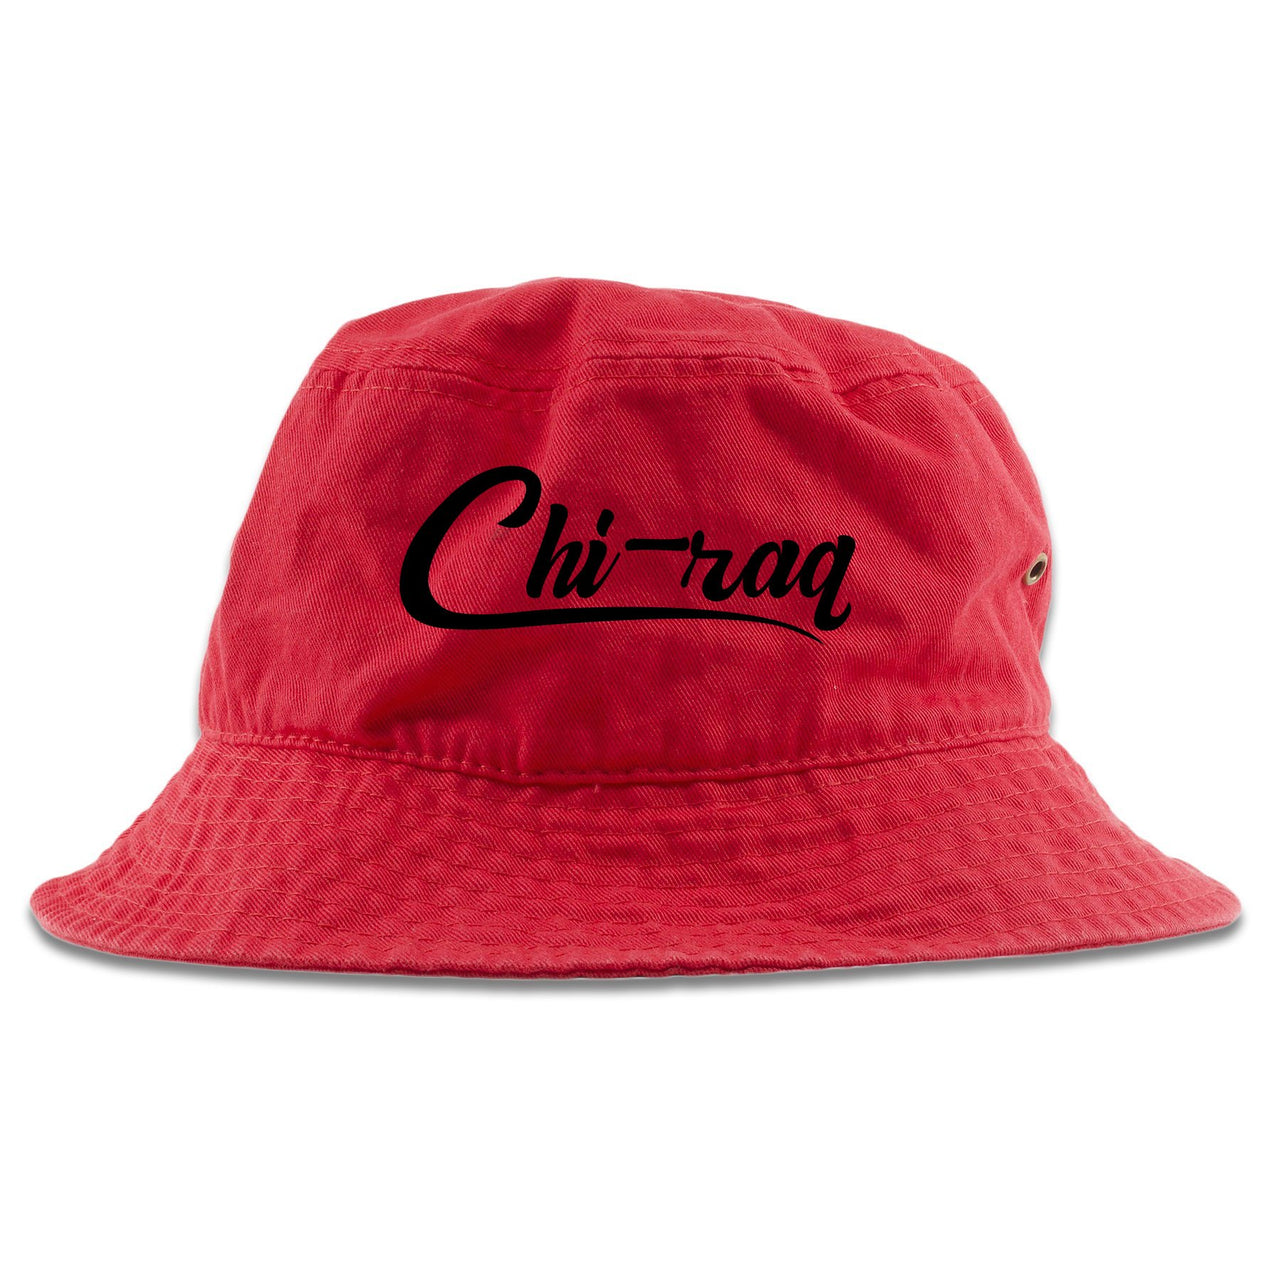 Reflections of a Champion 8s Bucket Hat | Chiraq Script, Red